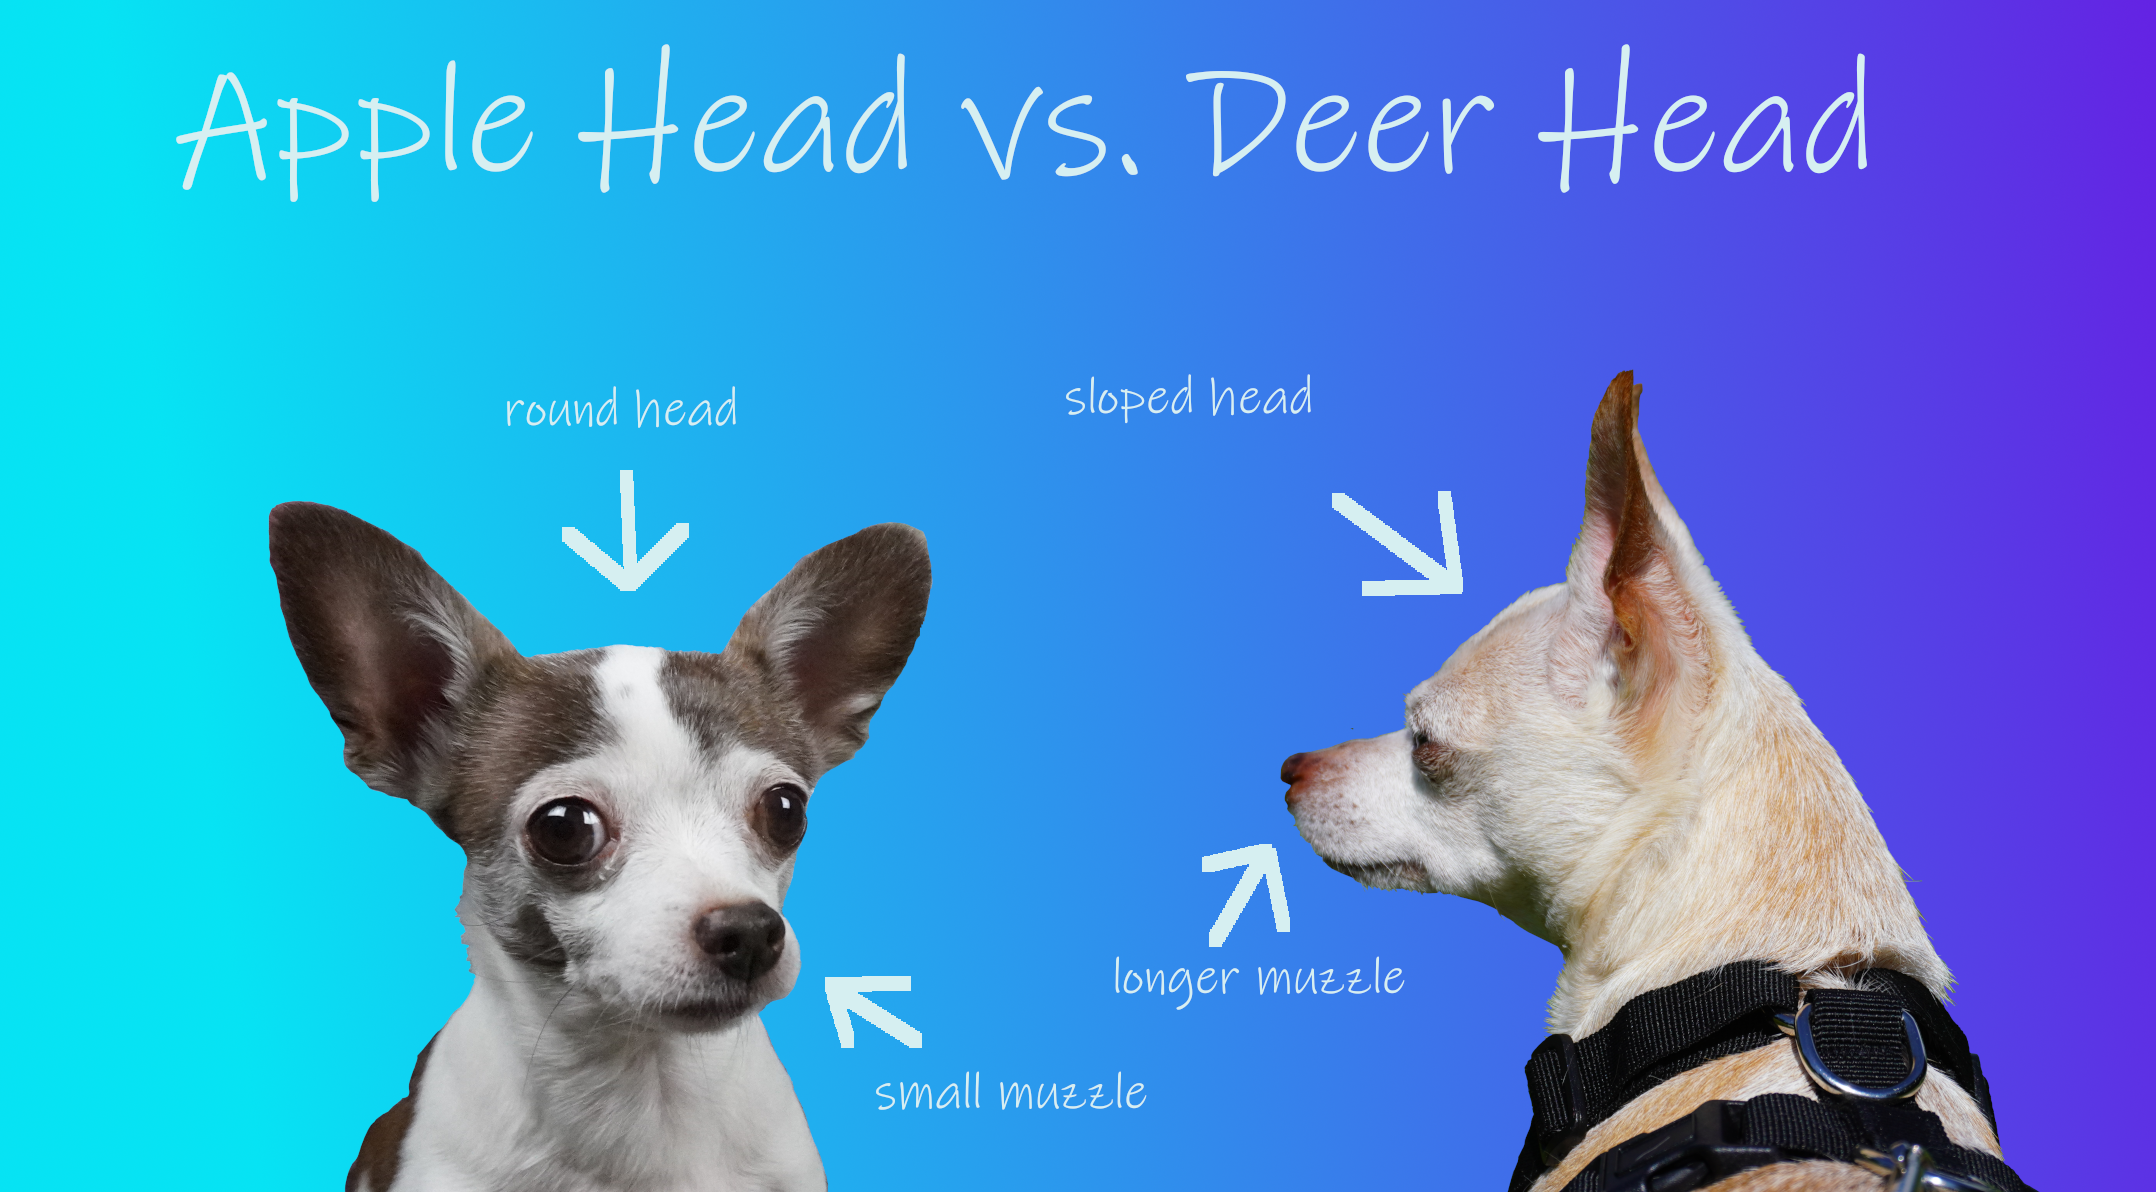 A chihuahua with a round apple head and short muzzle, a deer head chihuahua with a flatter, sloped head.